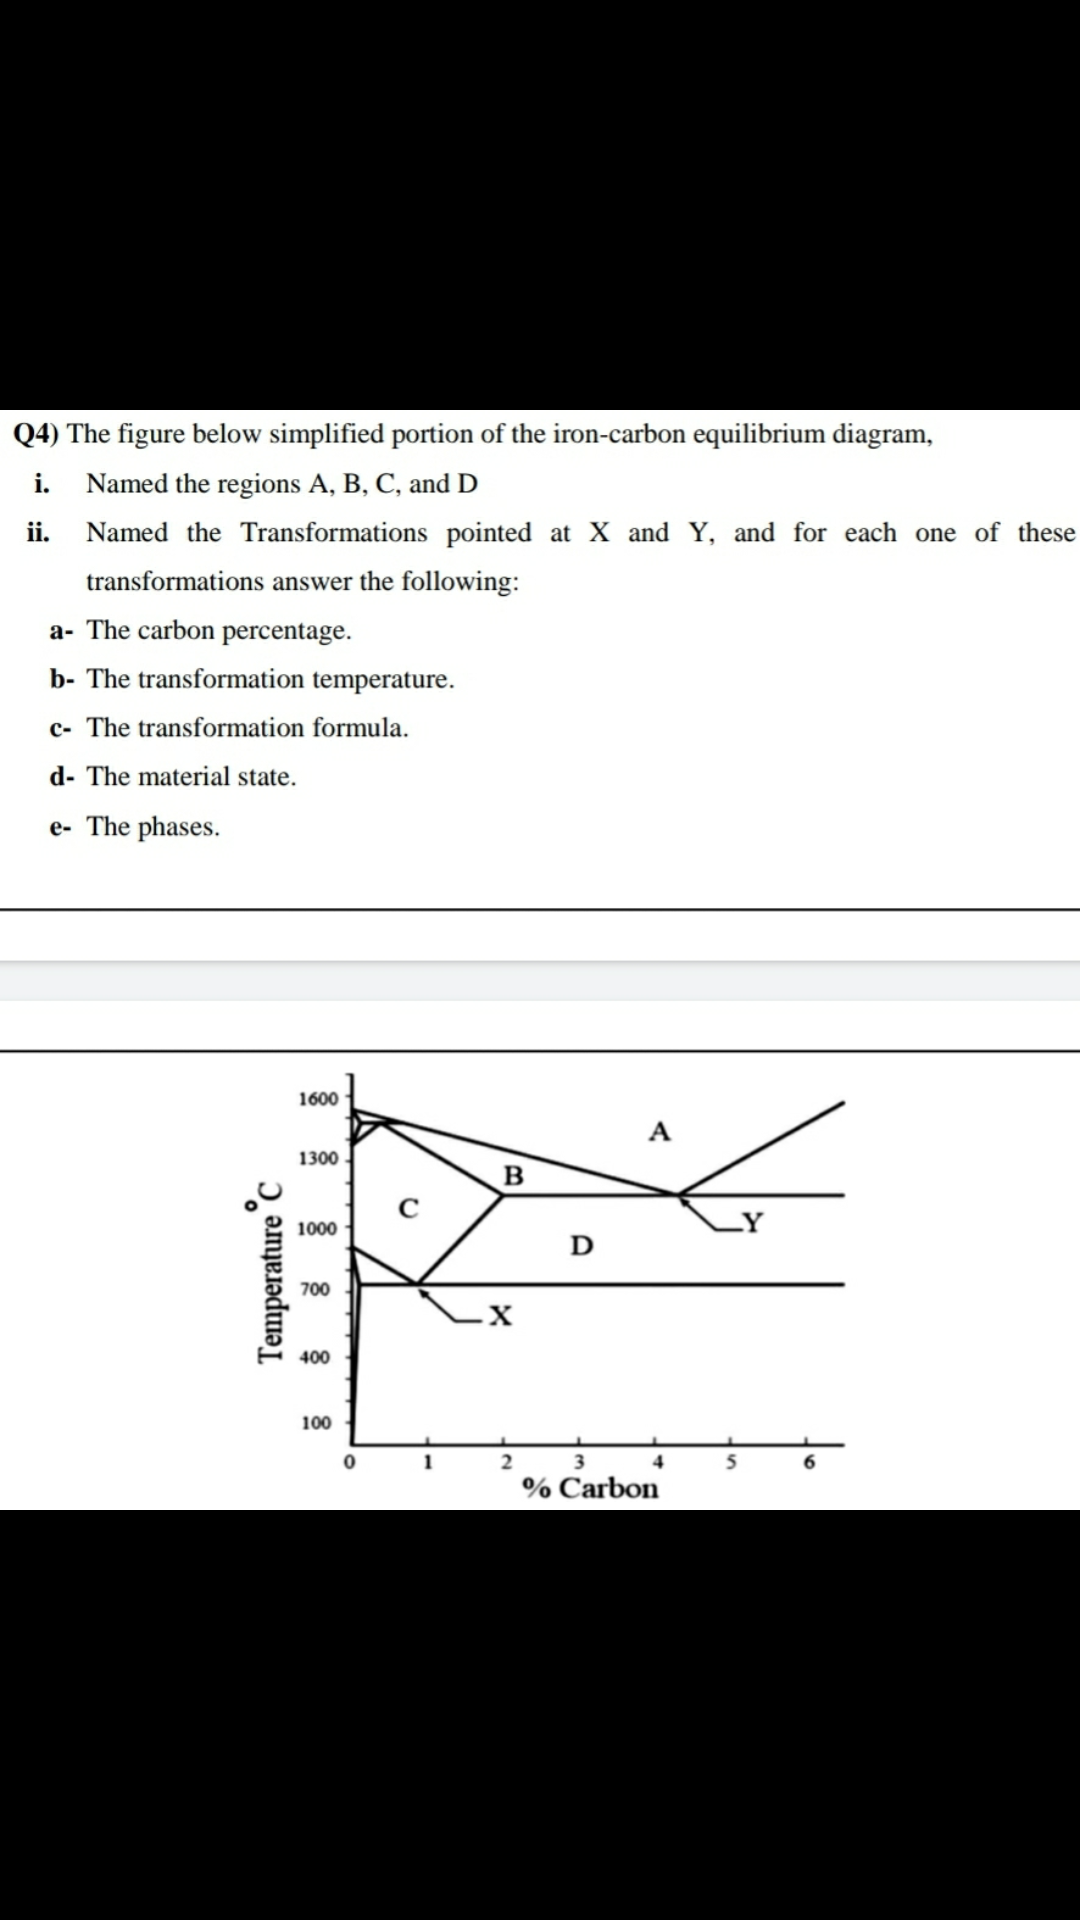 Q4) The figure below simplified portion of the iron-carbon equilibrium diagram,
i.
Named the regions A, B, C, and D
ii.
Named the Transformations pointed at X and Y, and for each one of these
transformations answer the following:
a- The carbon percentage.
b- The transformation temperature.
c- The transformation formula.
d- The material state.
e- The phases.
1600
1300
1000
700
400
100
1
2
3
6.
% Carbon
Temperature C
